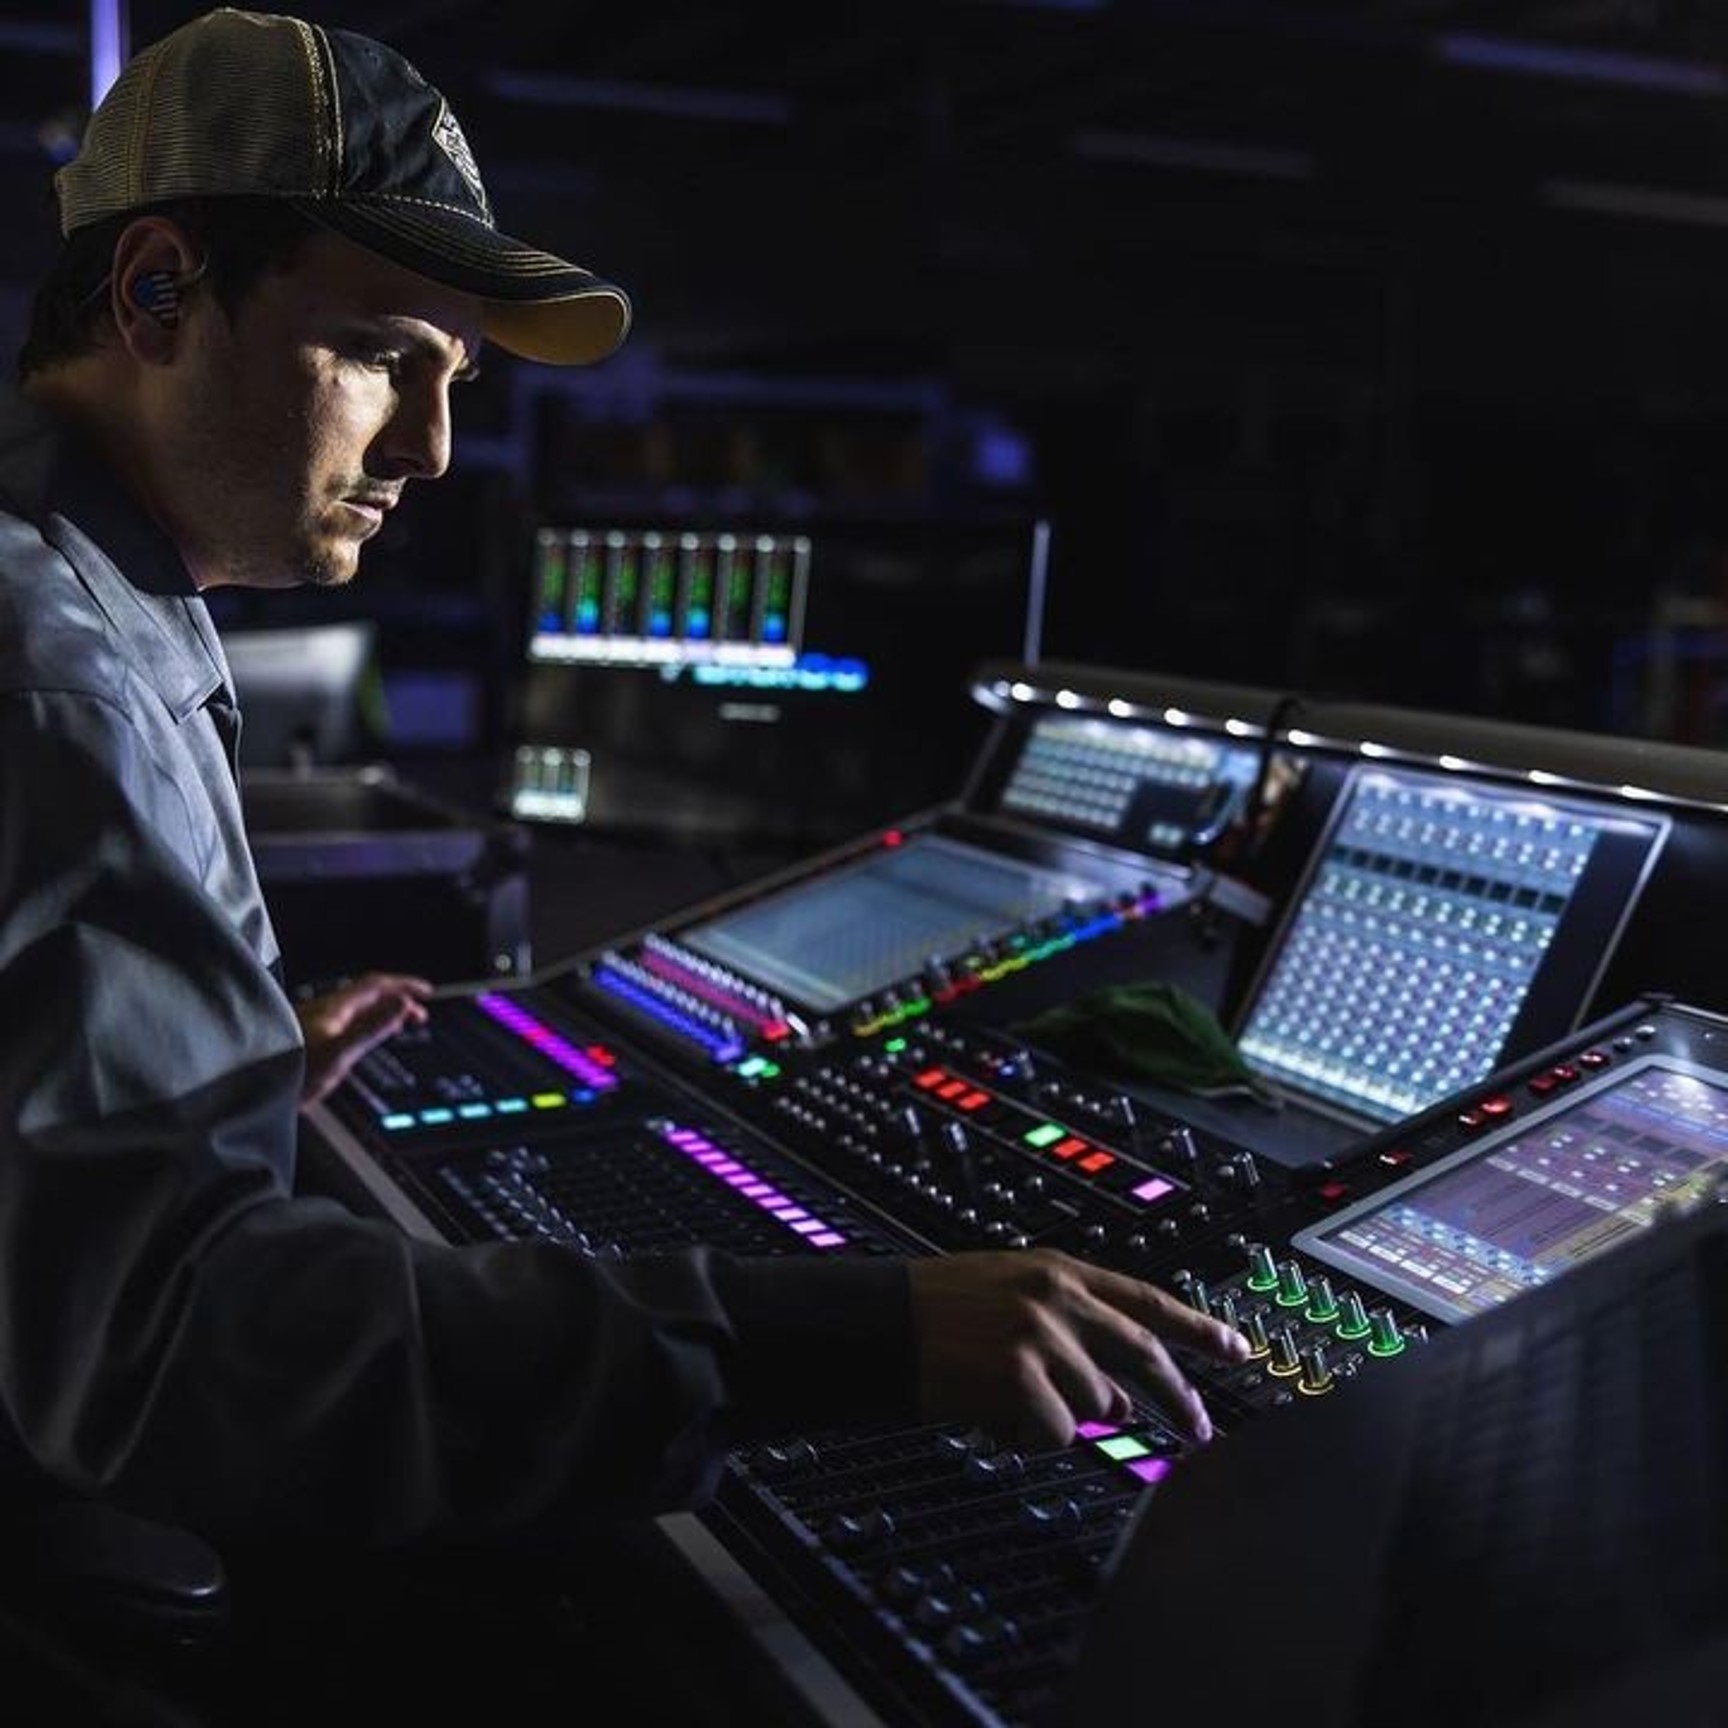 Audio engineer from CTS at work during a live event